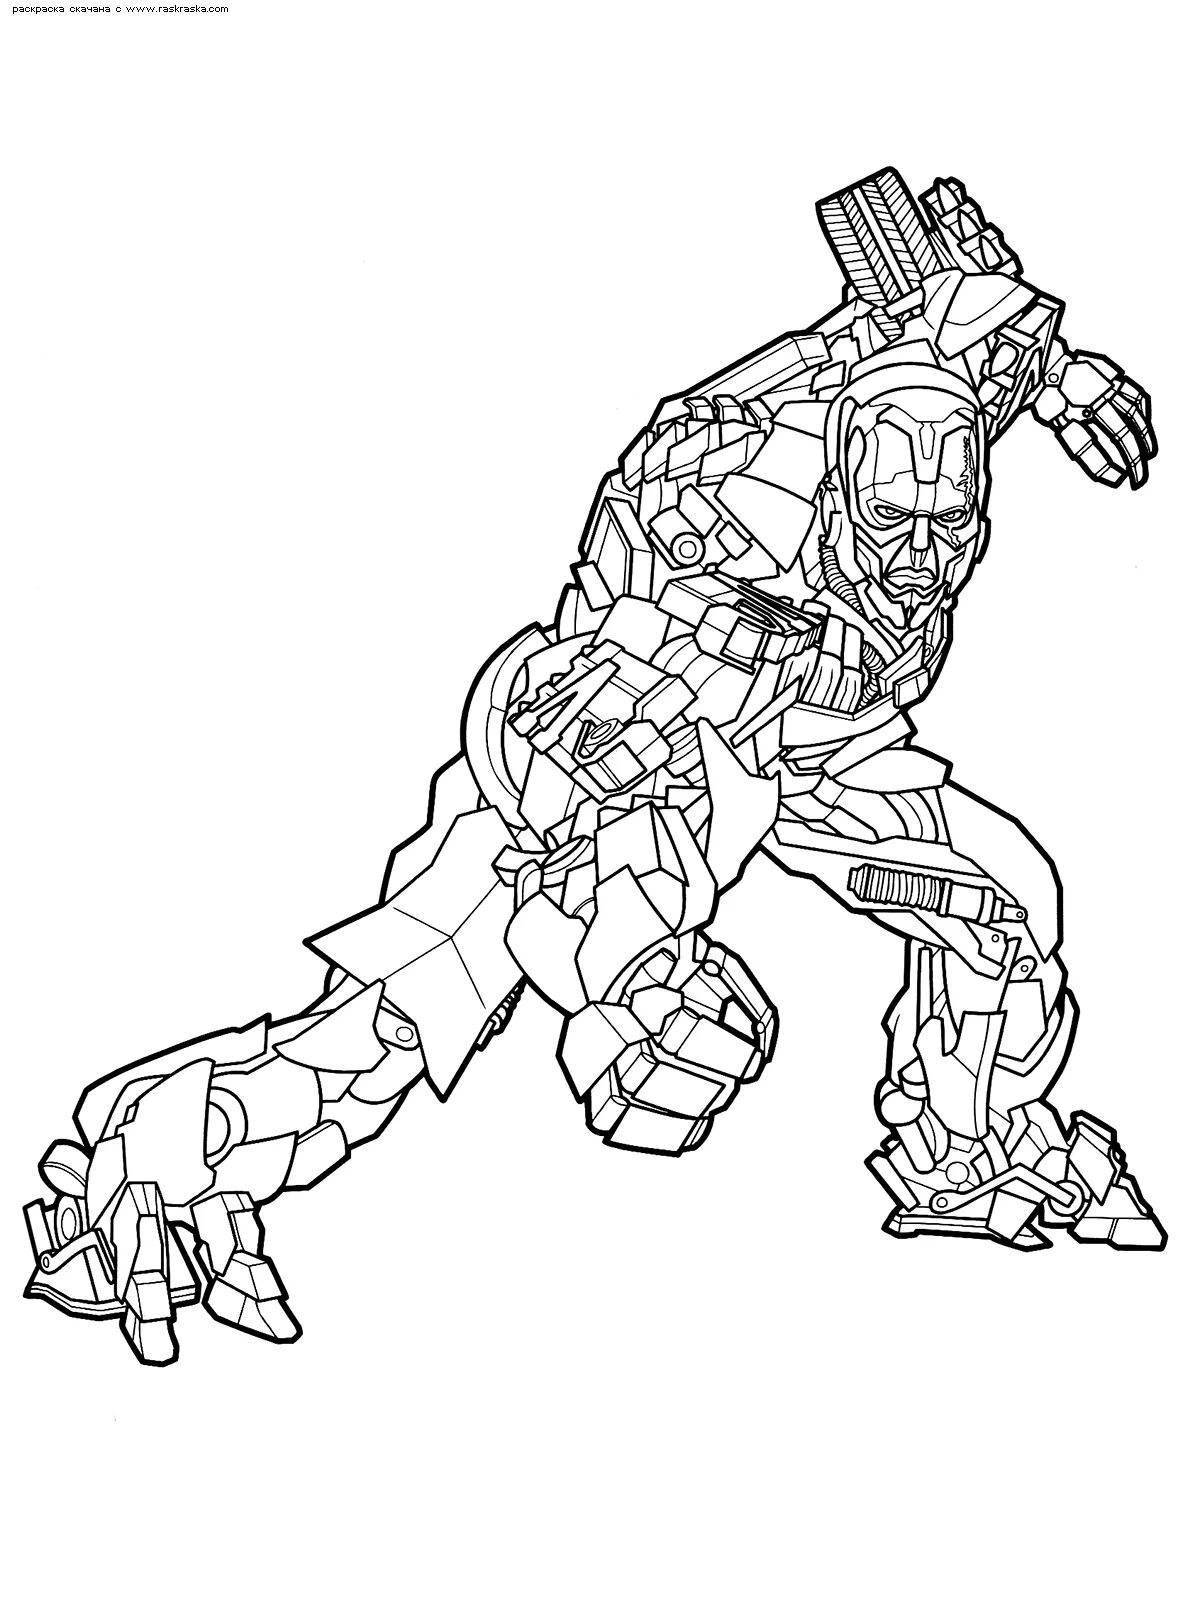 Cute ironhide coloring page